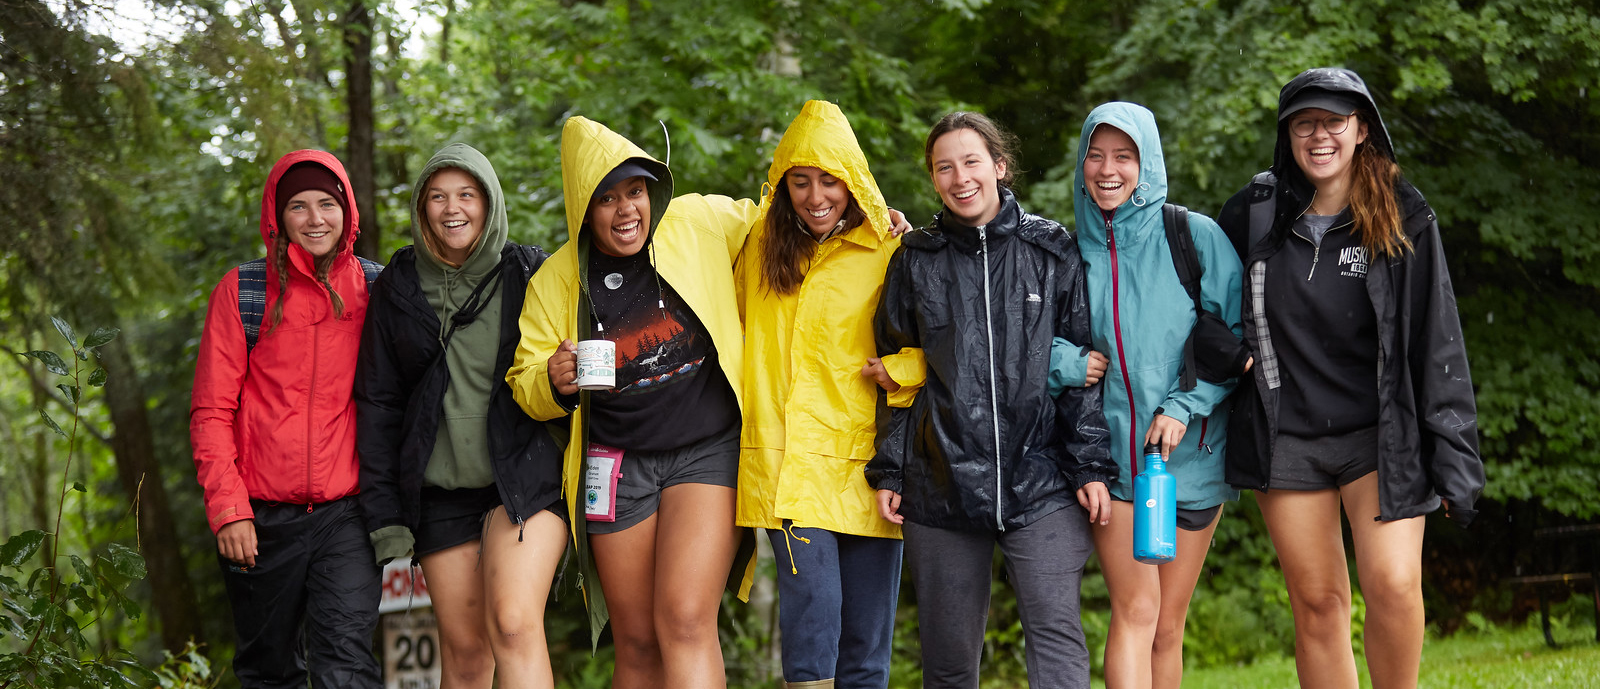 A group of seven Girl Guides ages 15 to 17 smiling and walking together in the woods while it’s raining. They are wearing rain jackets, some with hoods up.